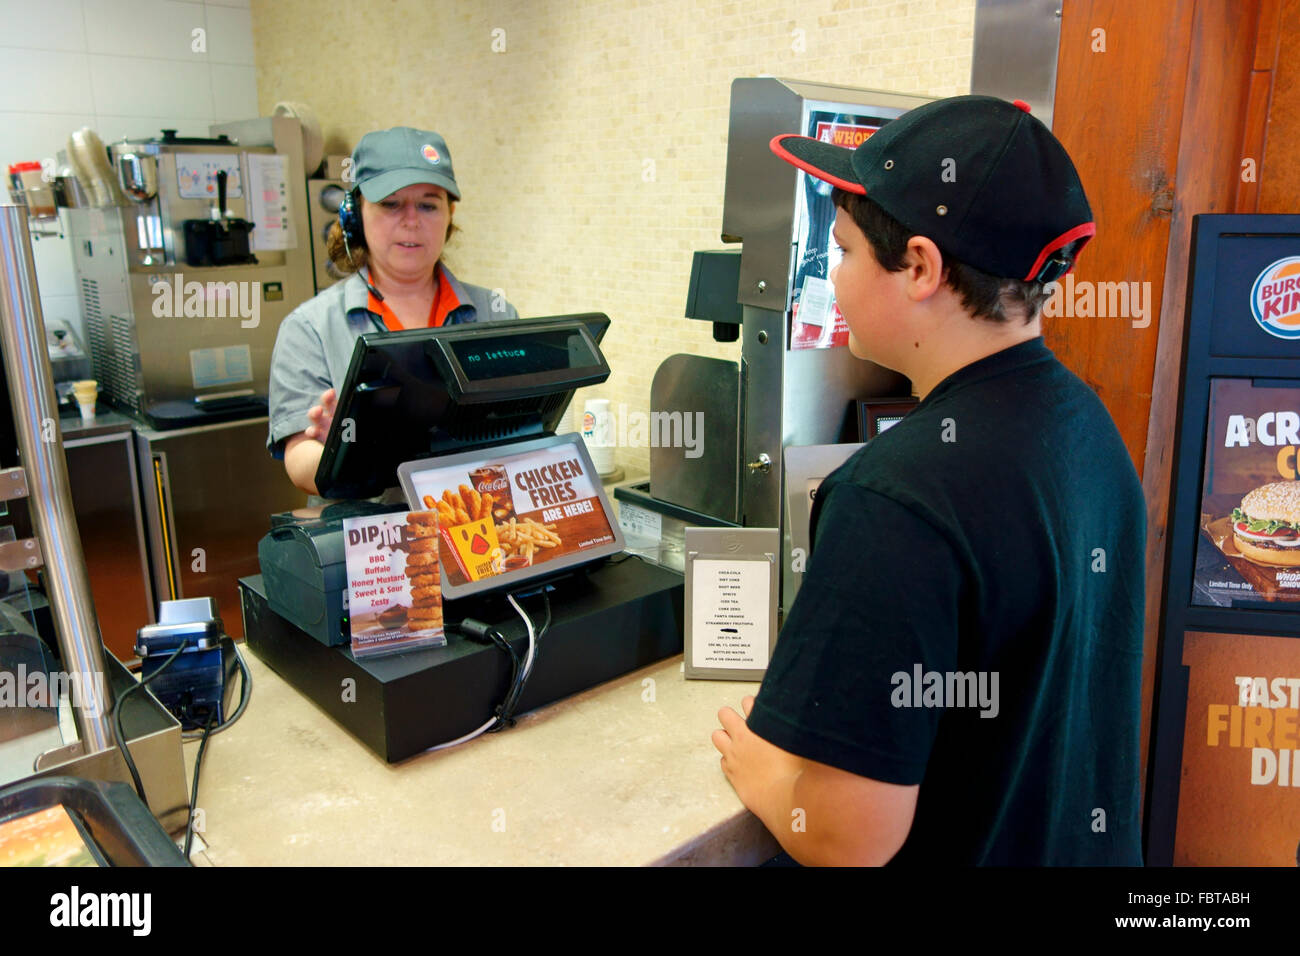 A 10 year old boy ordering fast food at a Burger King outlet Stock Photo